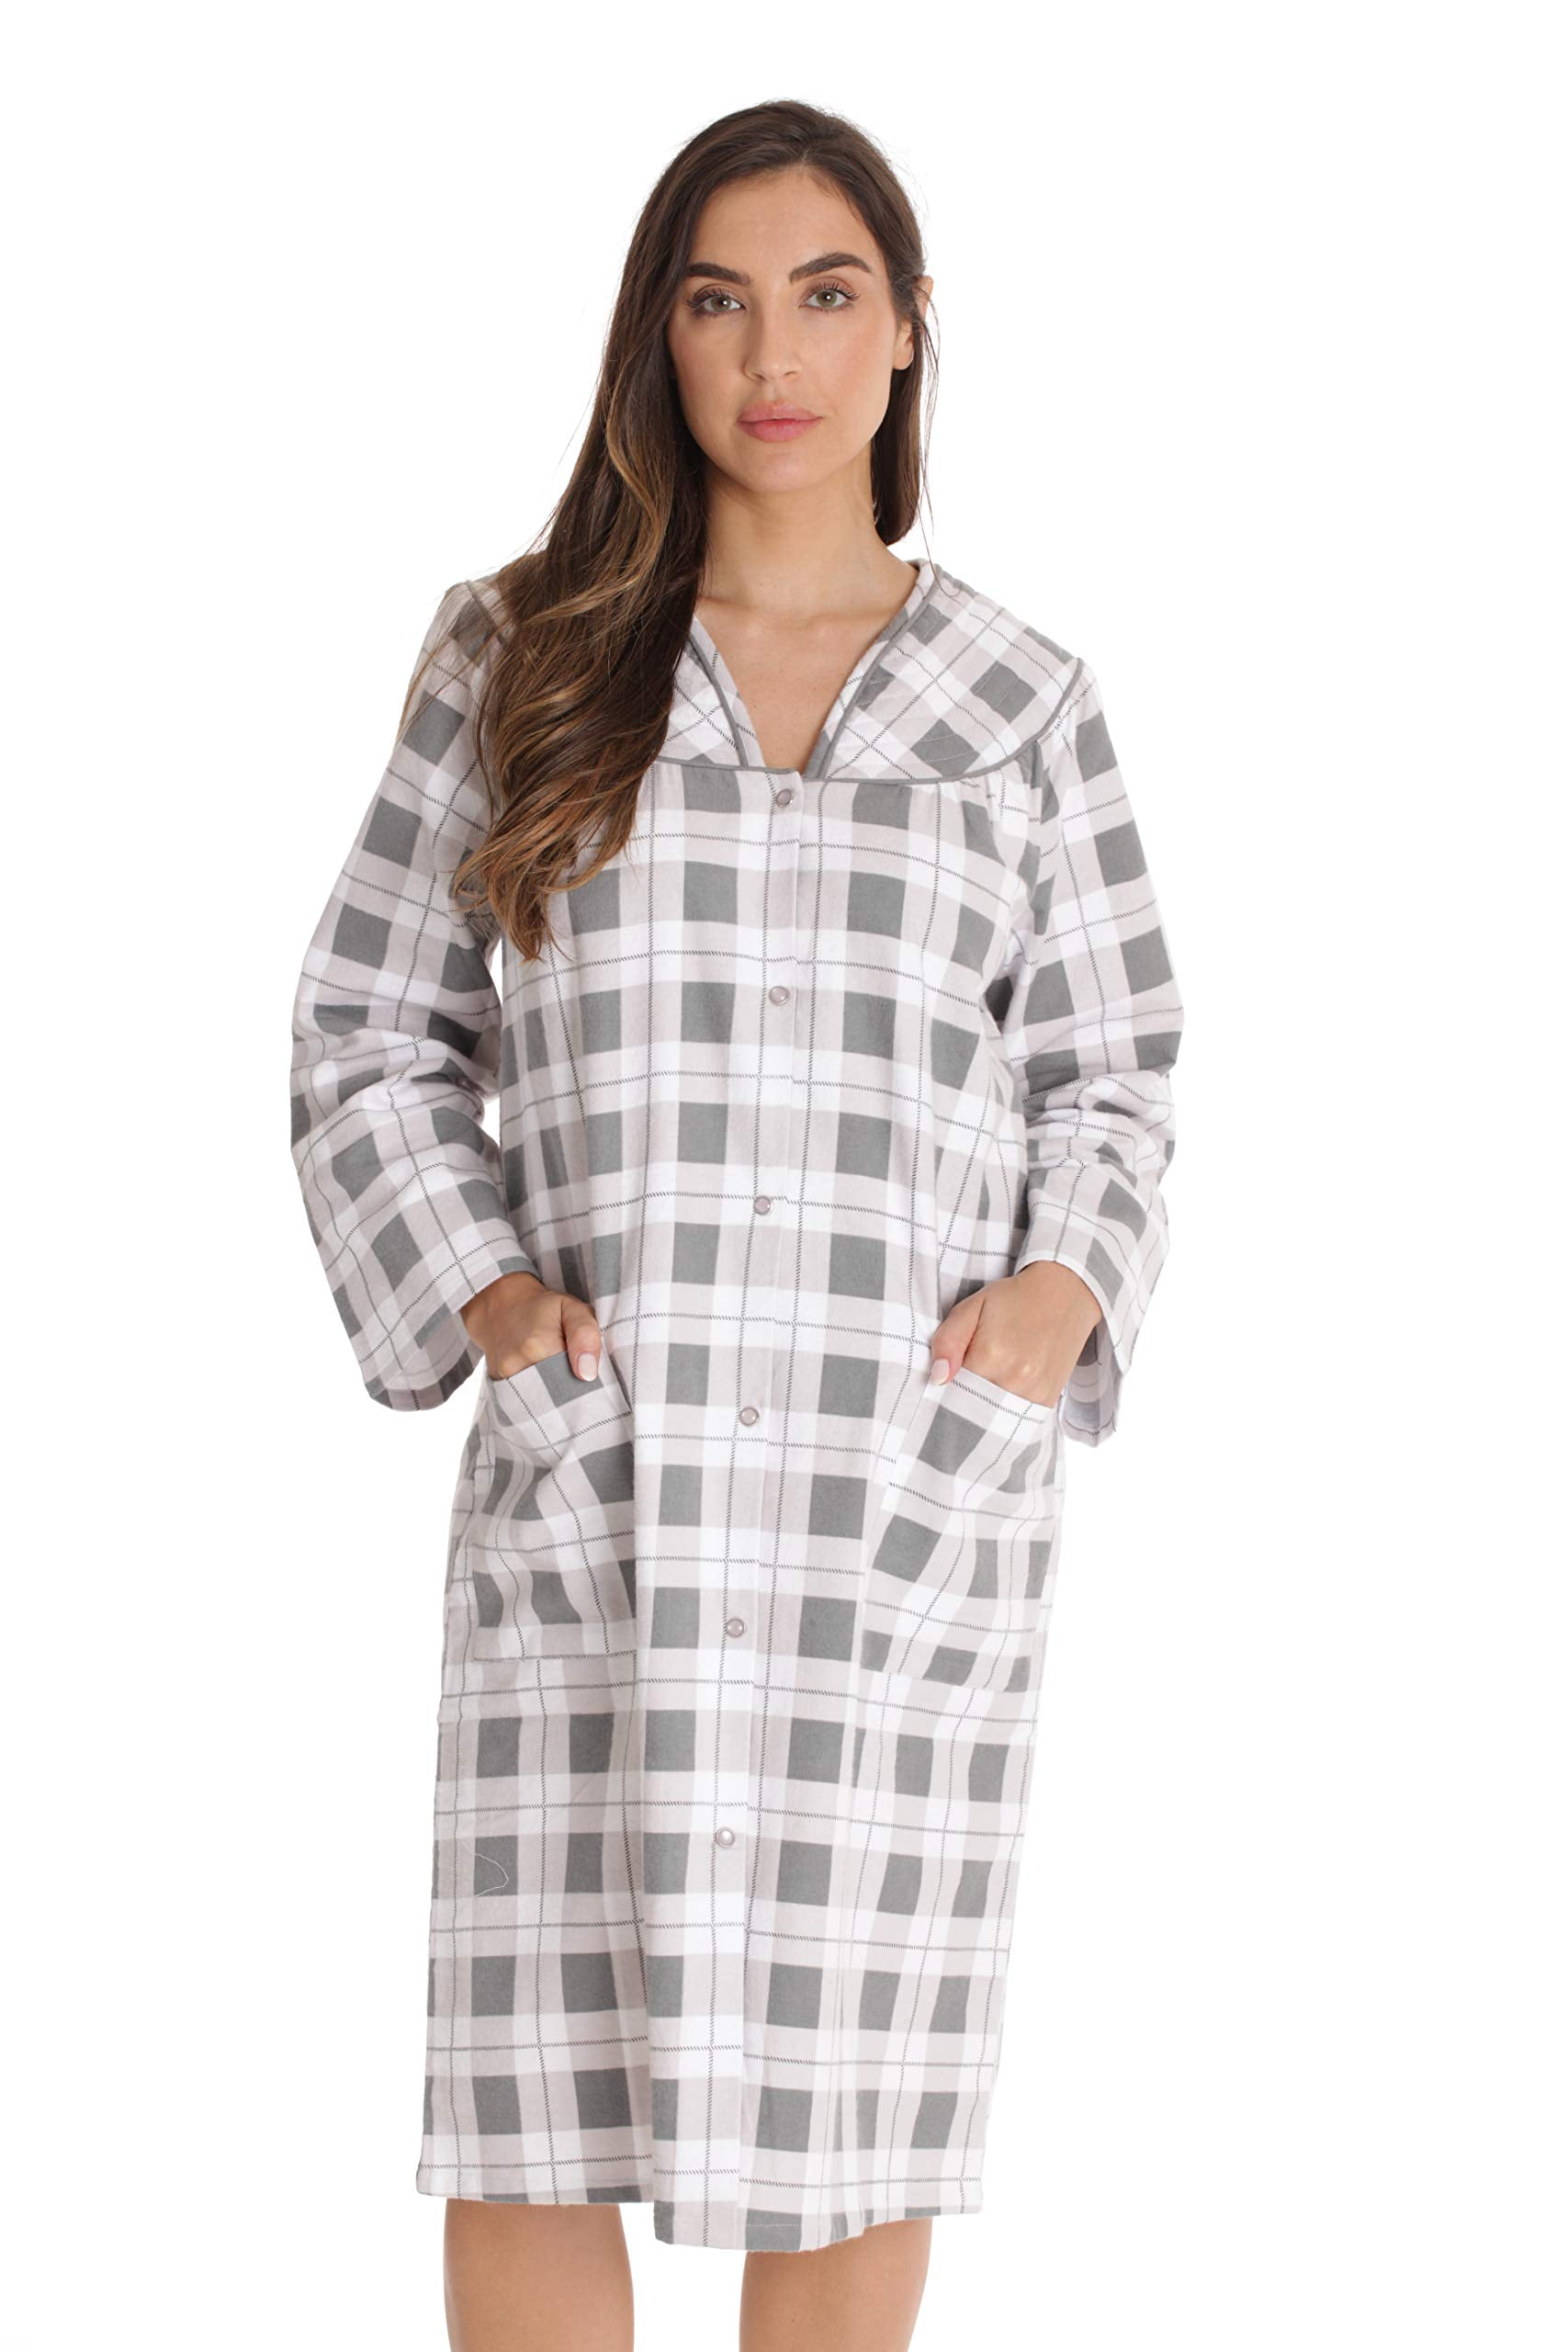 Dreamcrest Women’s Snap-Front House Coat Flannel Duster Robe with ...